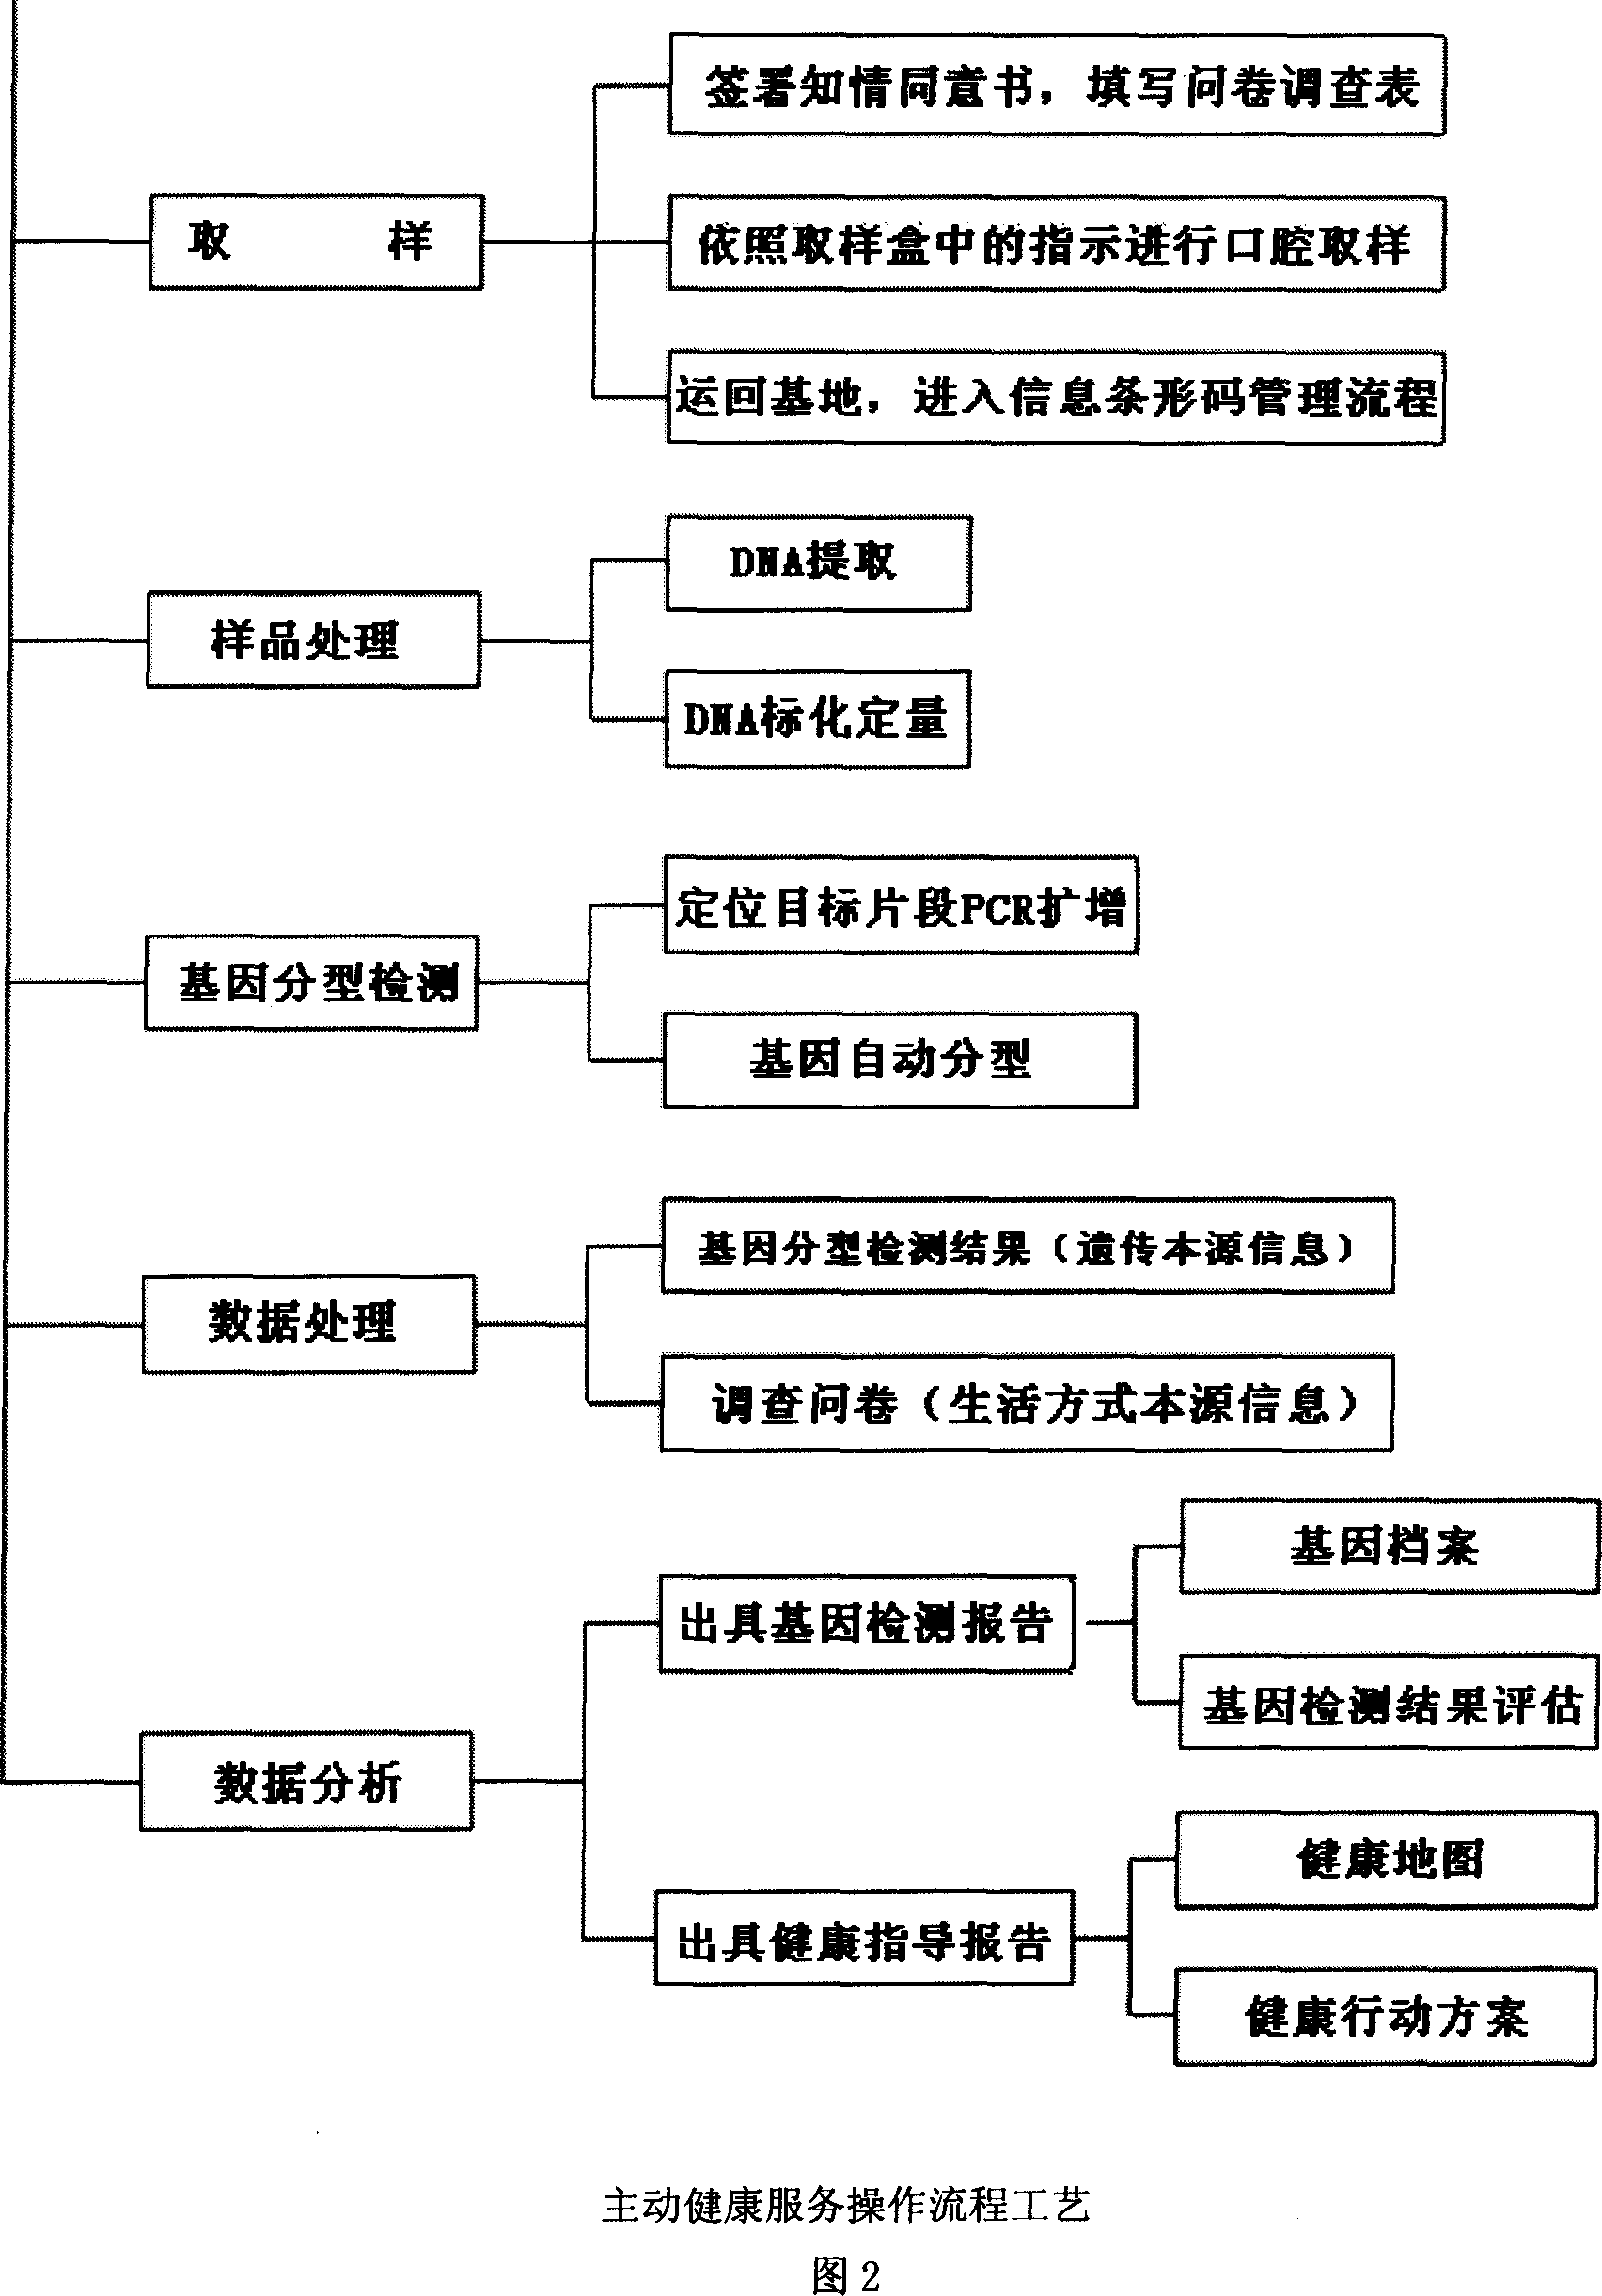 Service system and method by using technique of gene detection to provide active health service